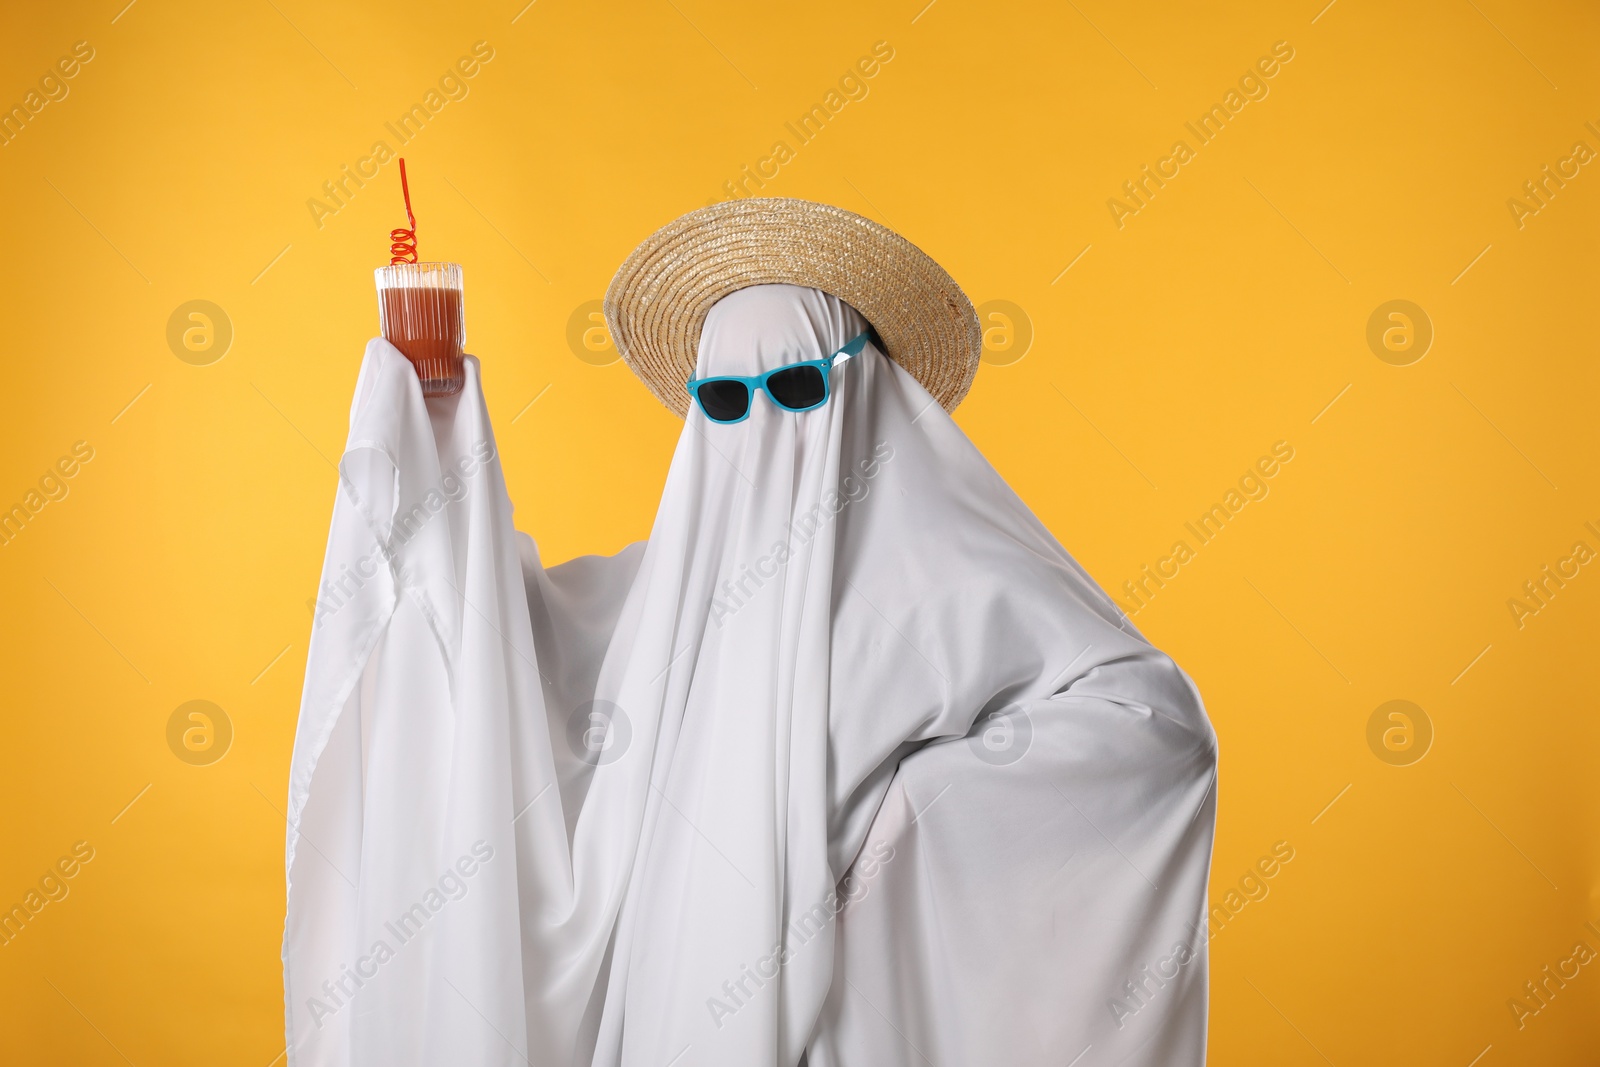 Photo of Person in ghost costume, sunglasses and straw hat holding glass of drink on yellow background